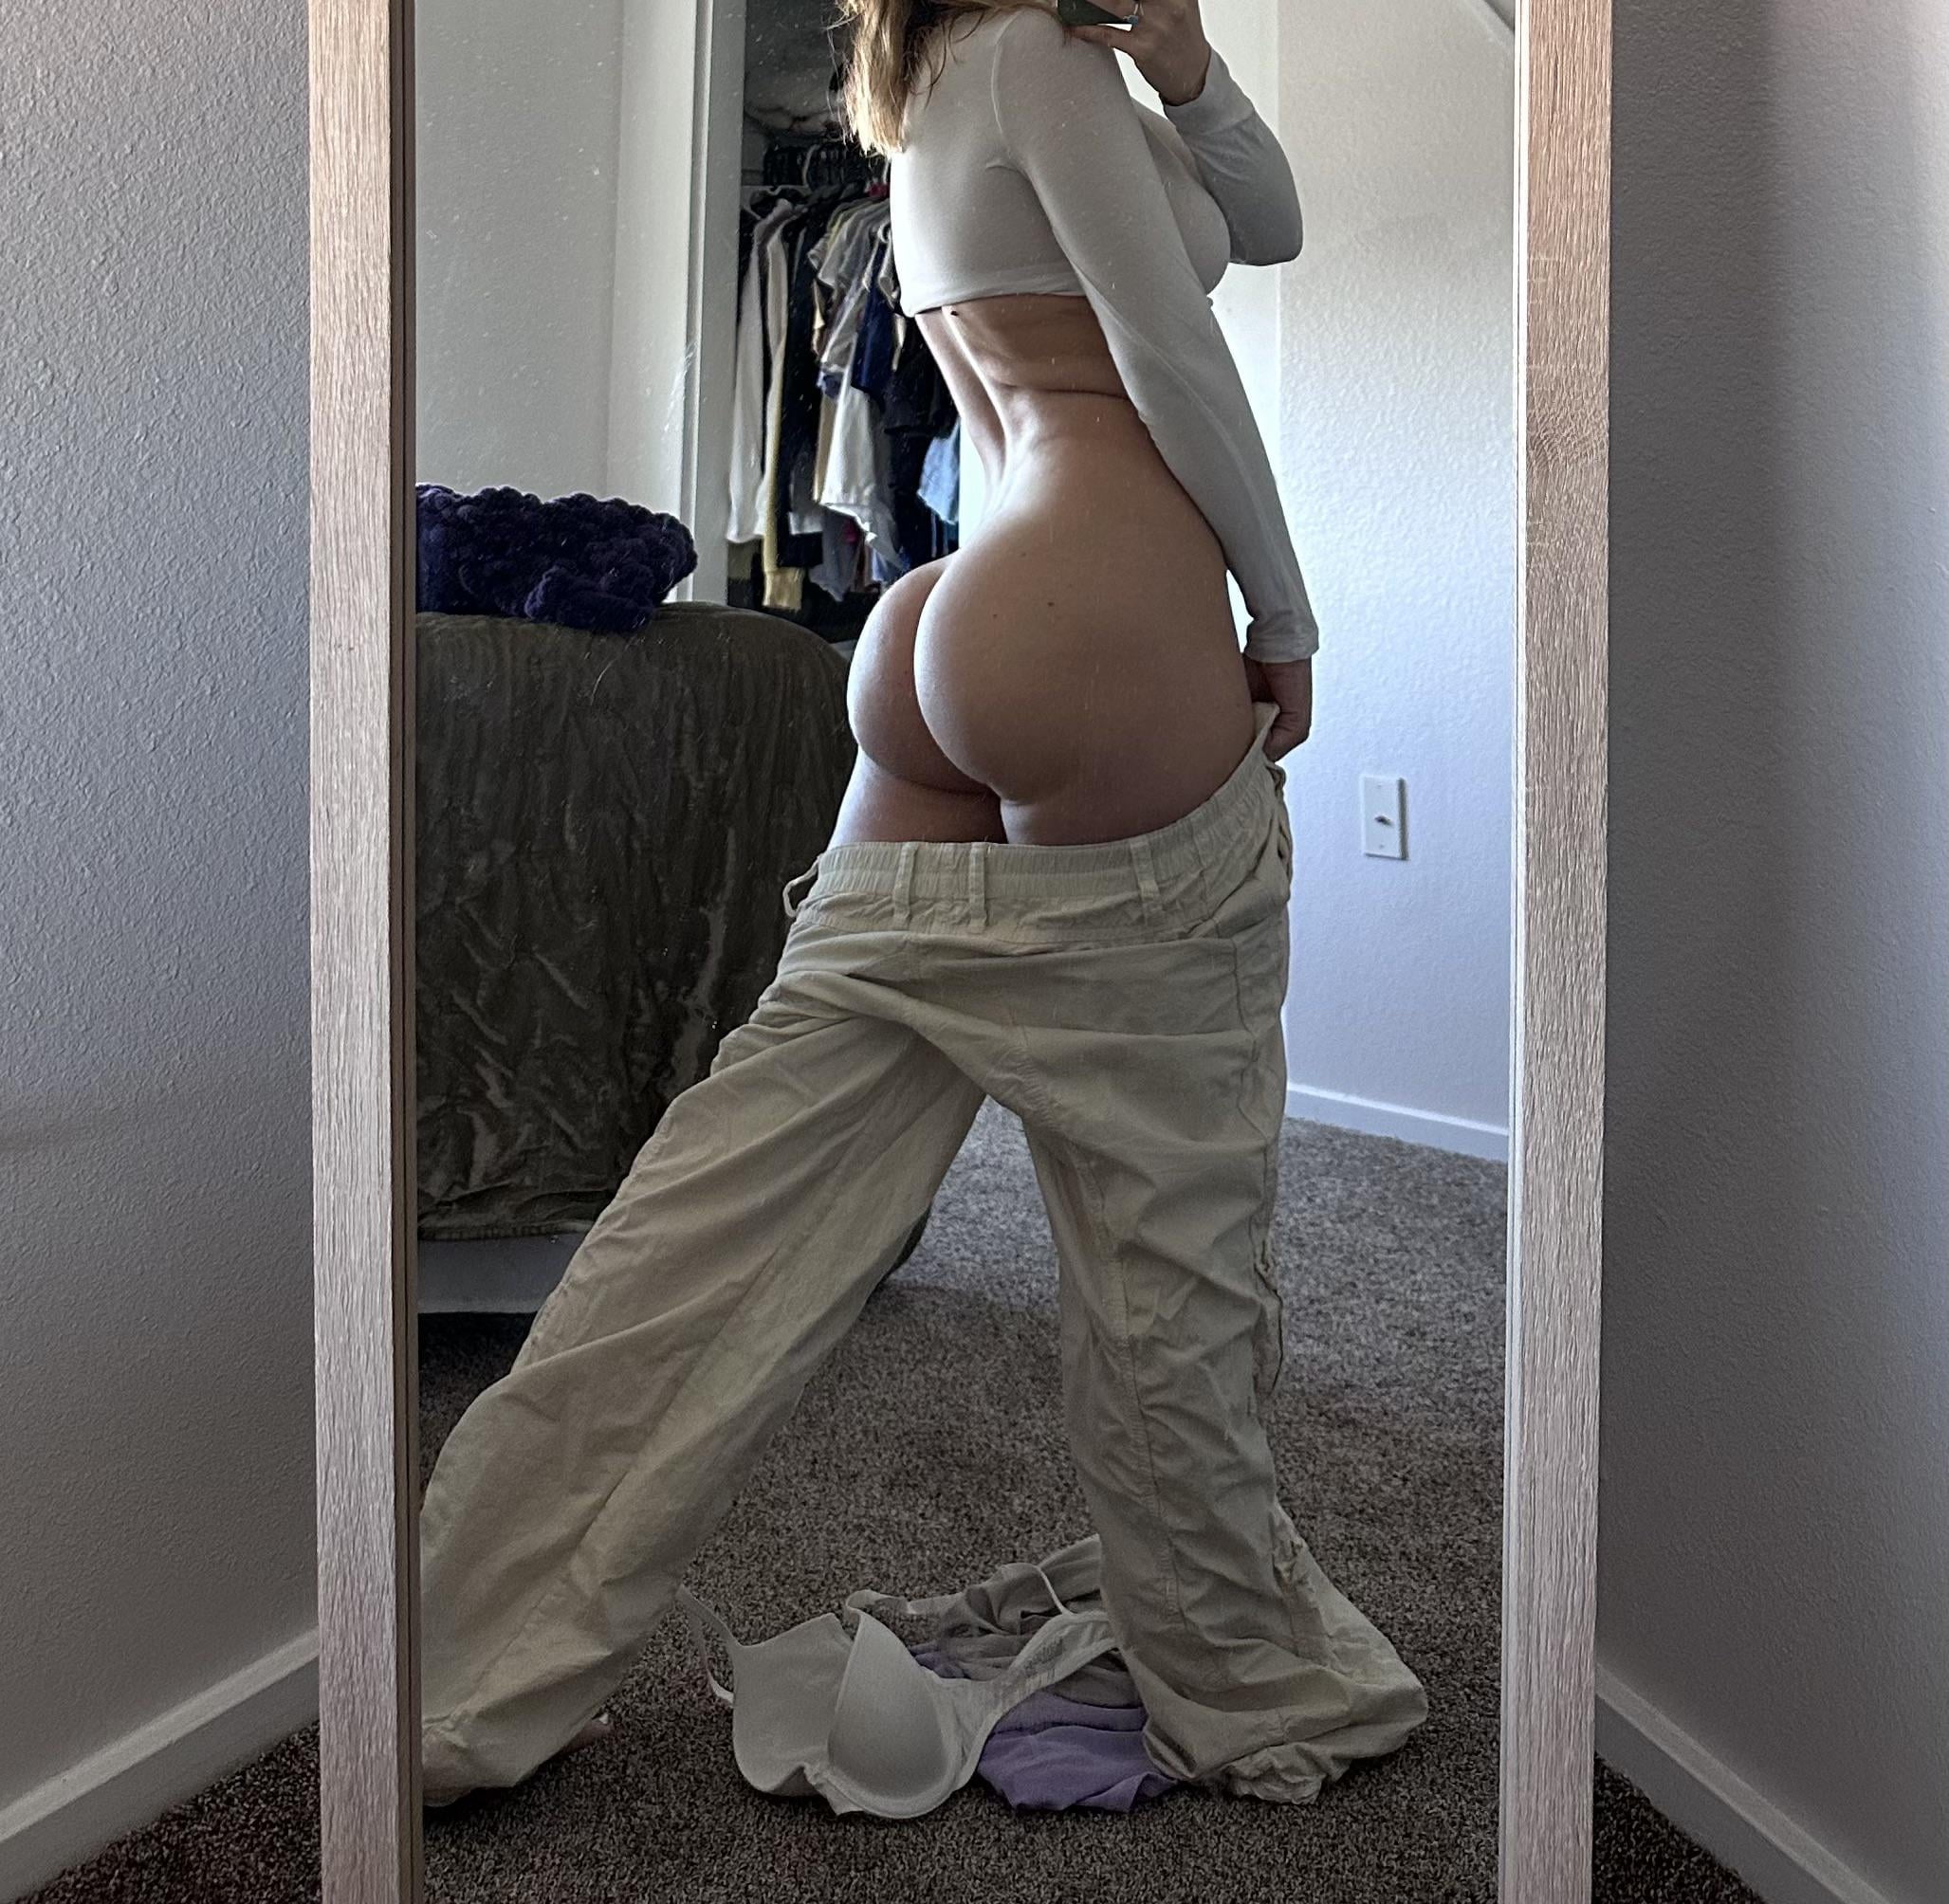 Natural perky ass Thick White Girls